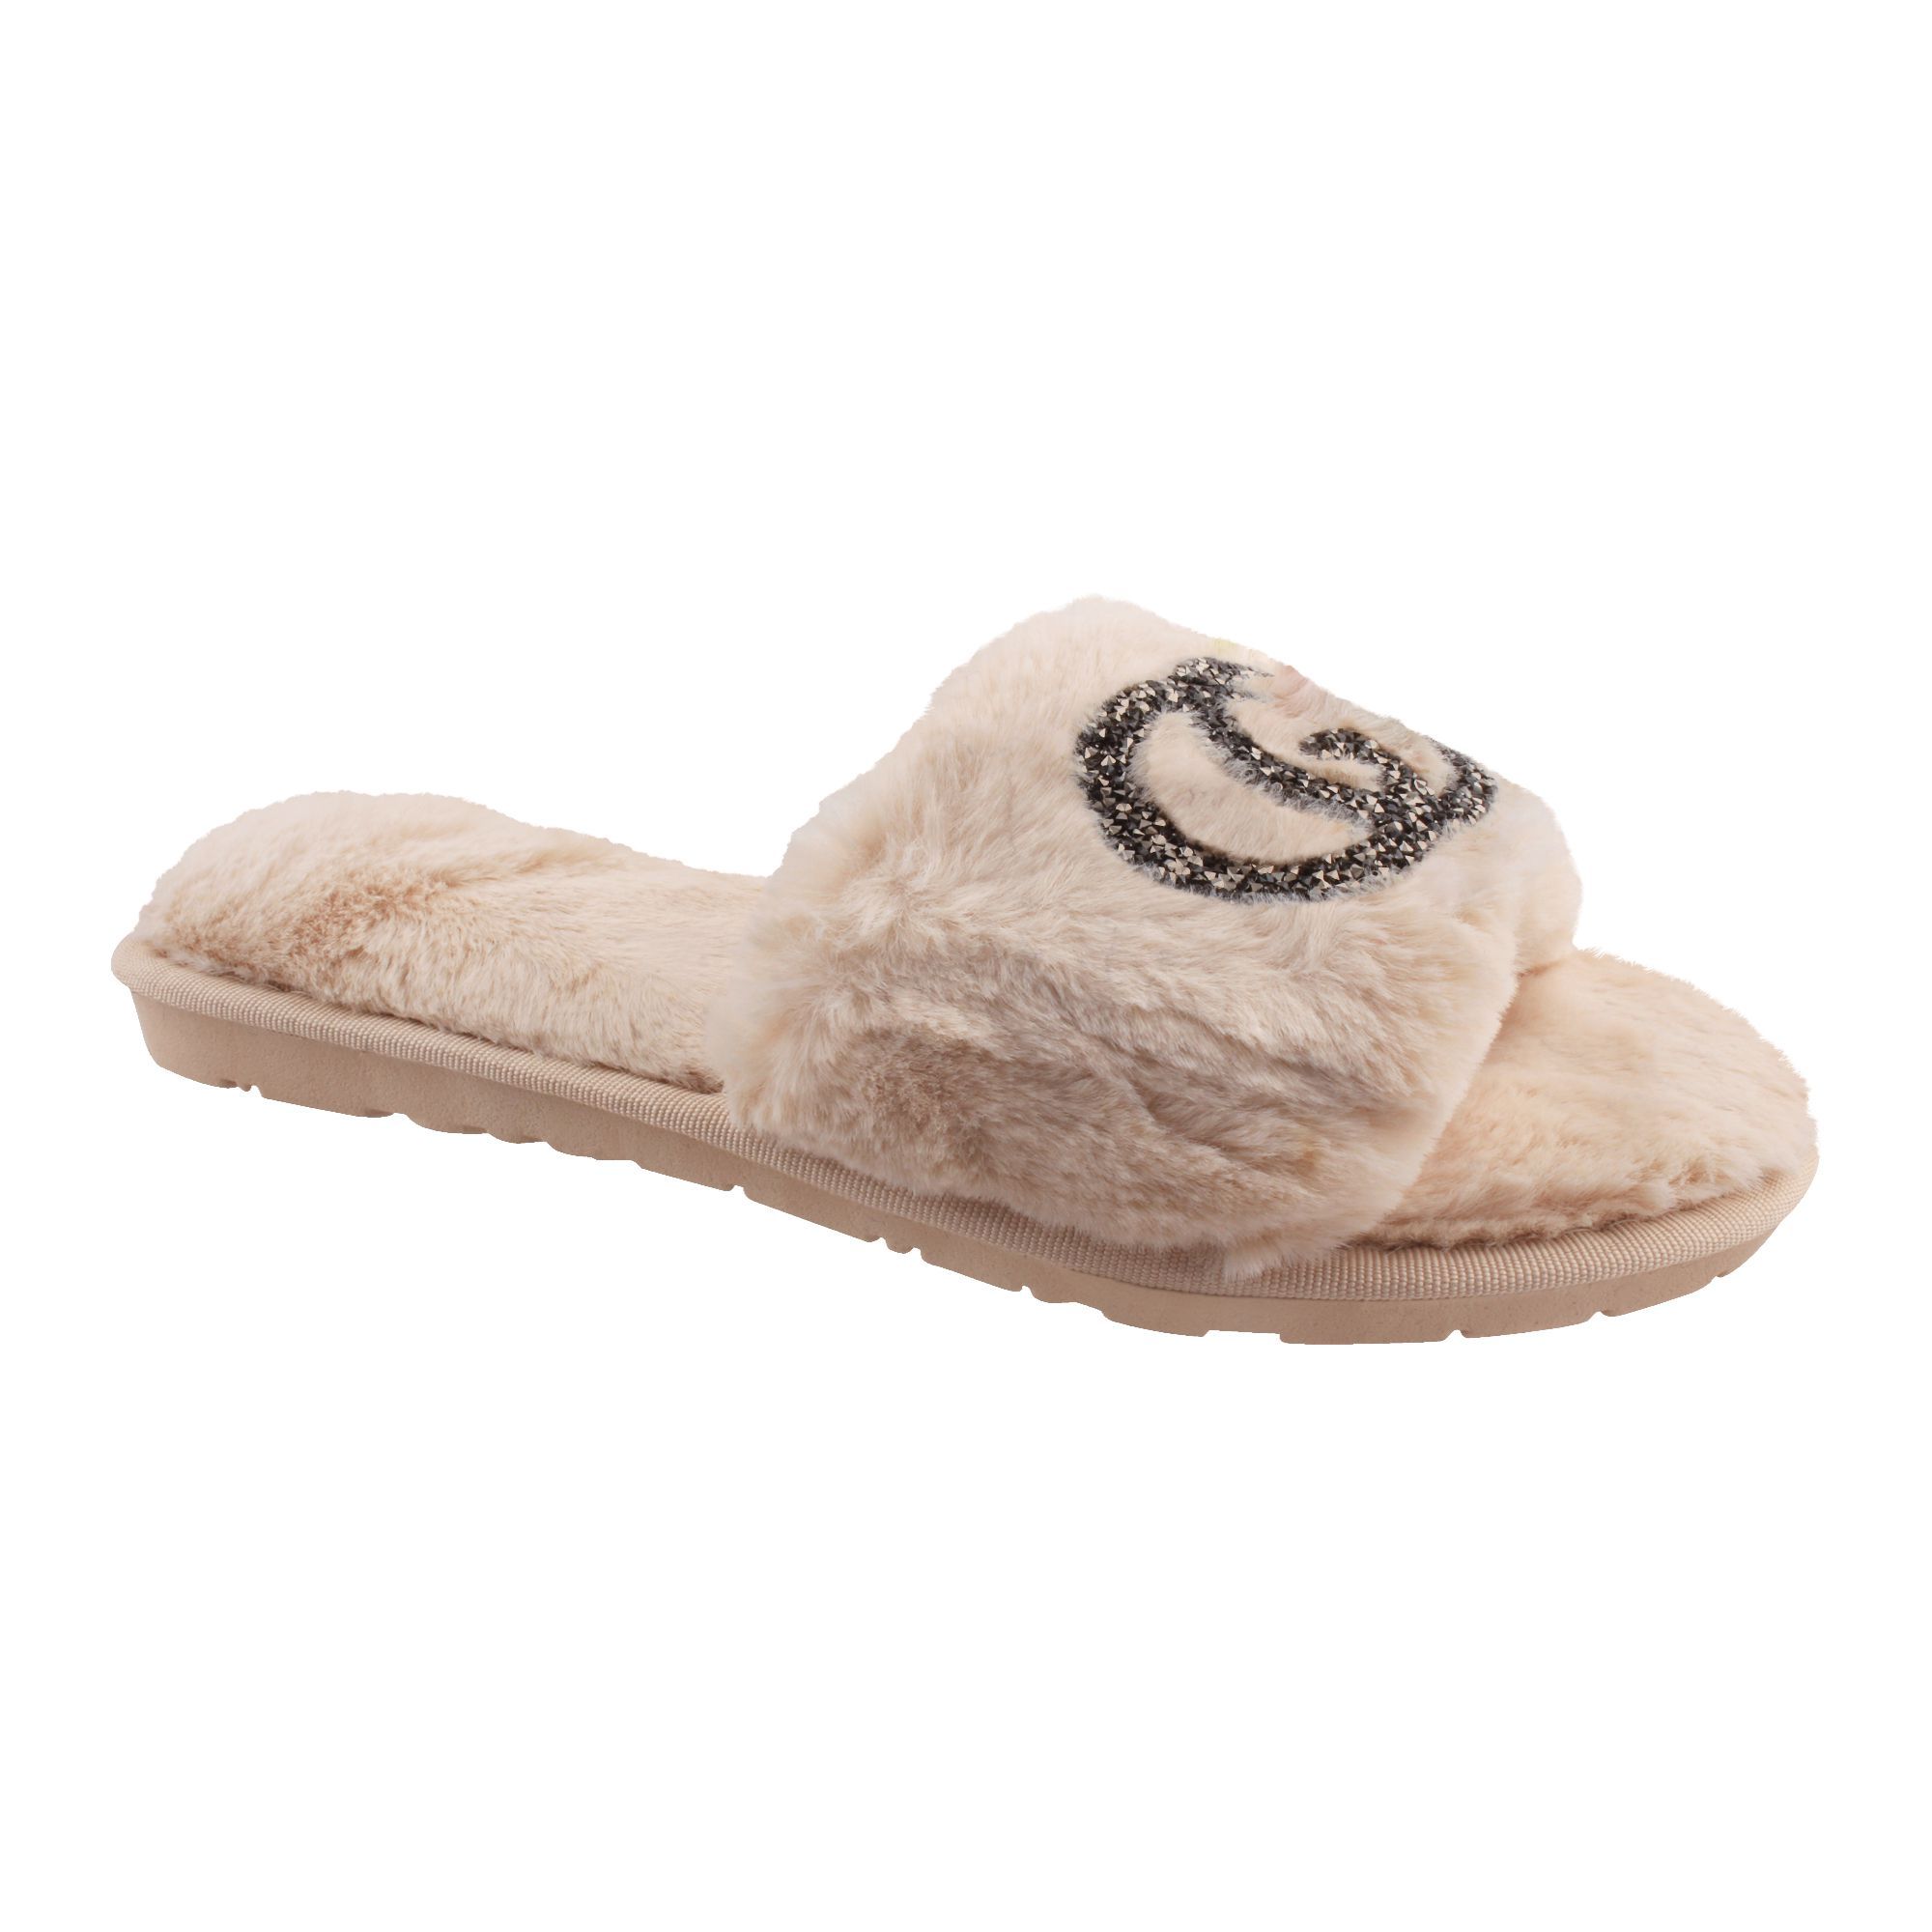 buy gucci style women's bedroom slippers, beige, 1219 online at